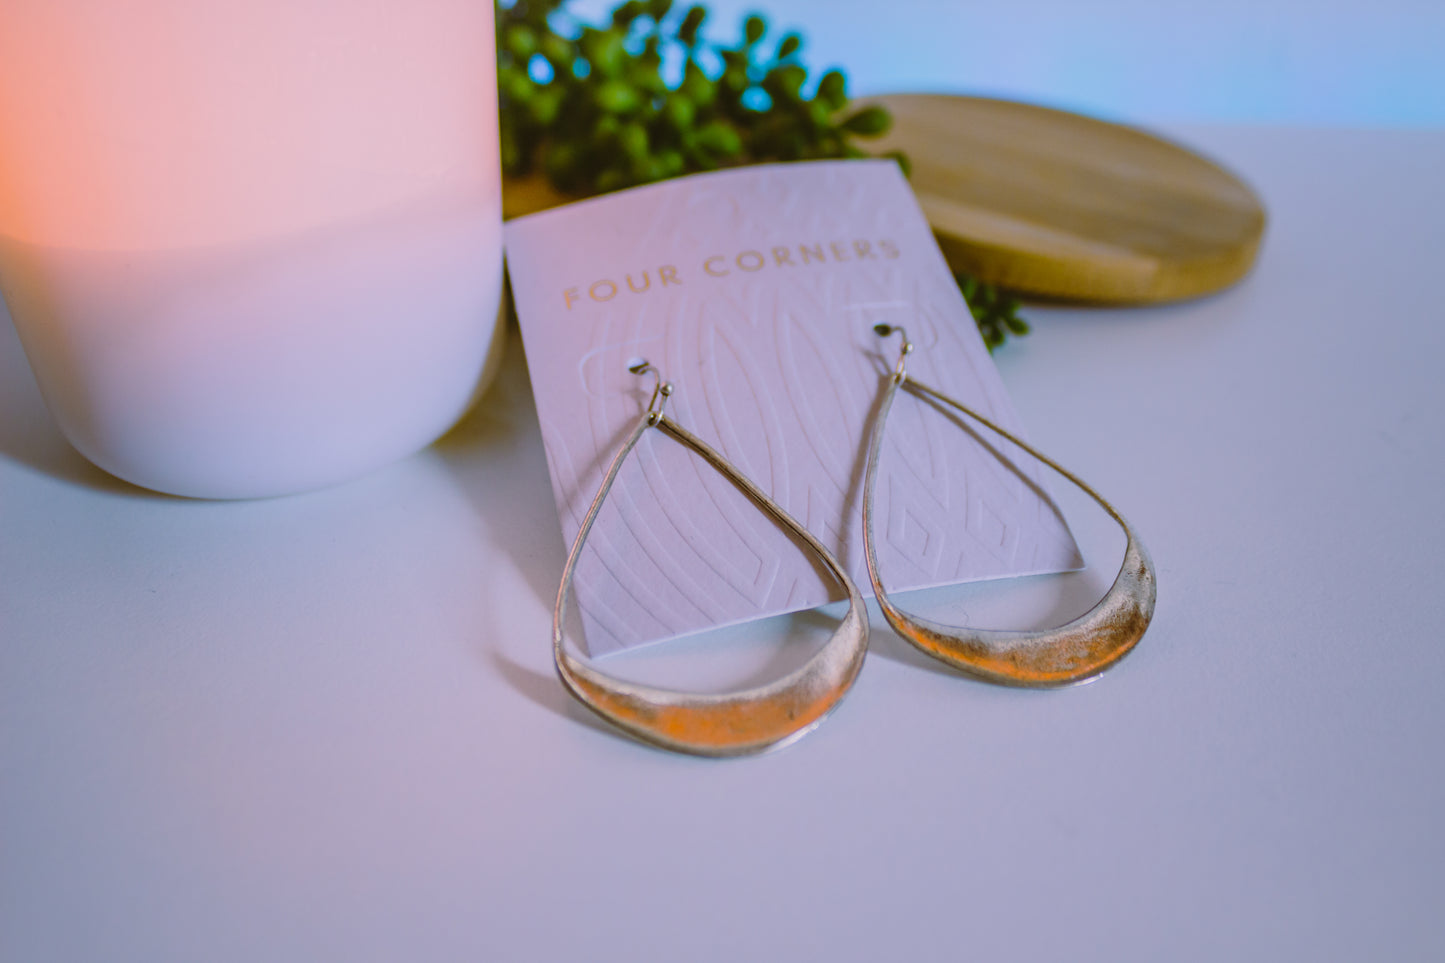 FOUR CORNERS EARRINGS - SILVER CURVED TRIANGLE - RV